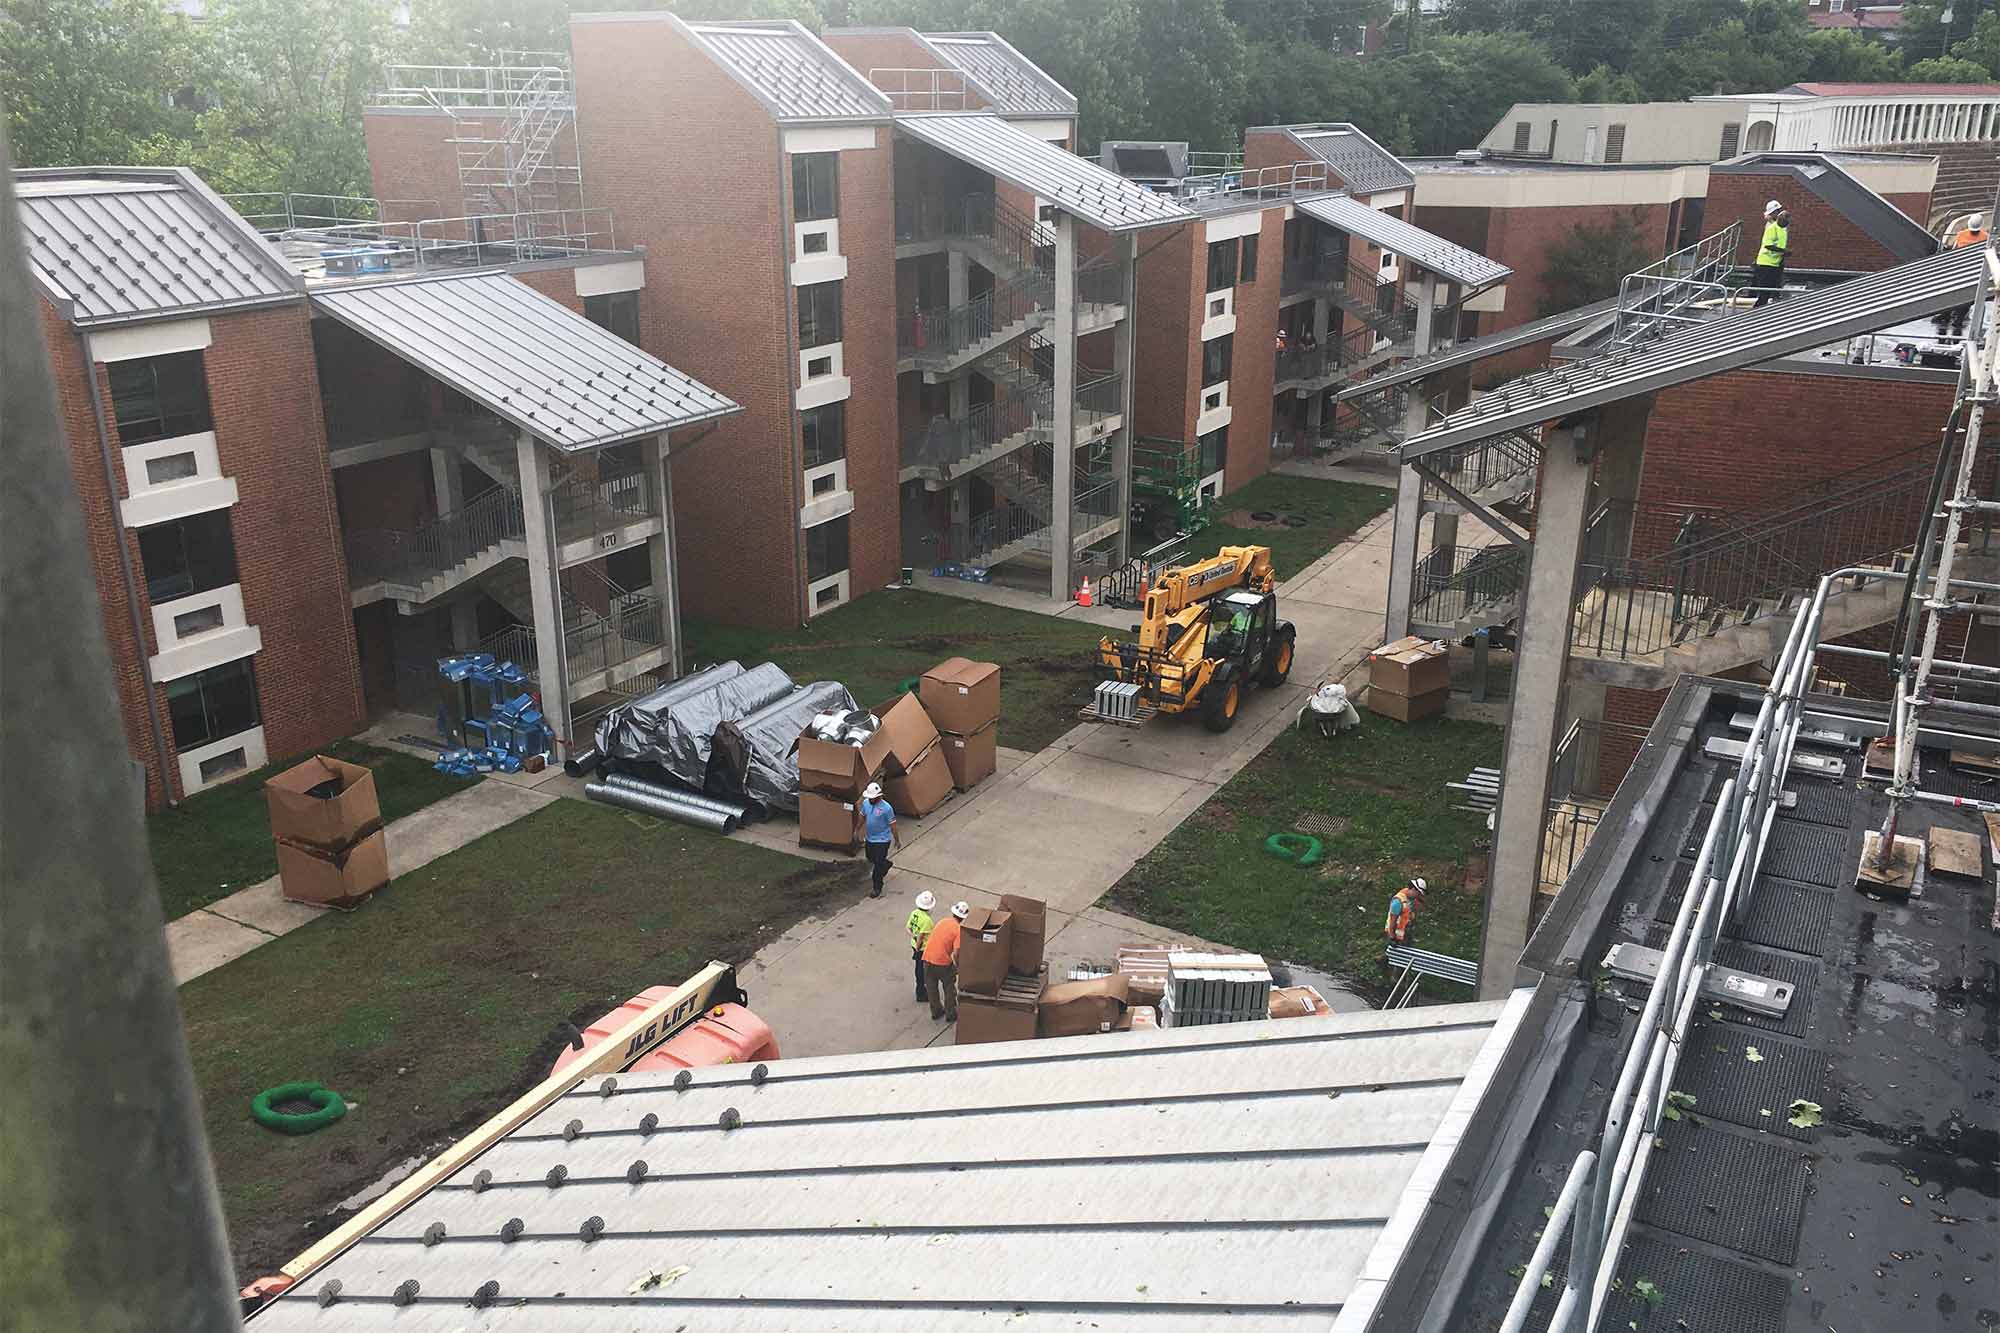 Construction equipment and stacks of boxes and supplies outside student apartment buildings